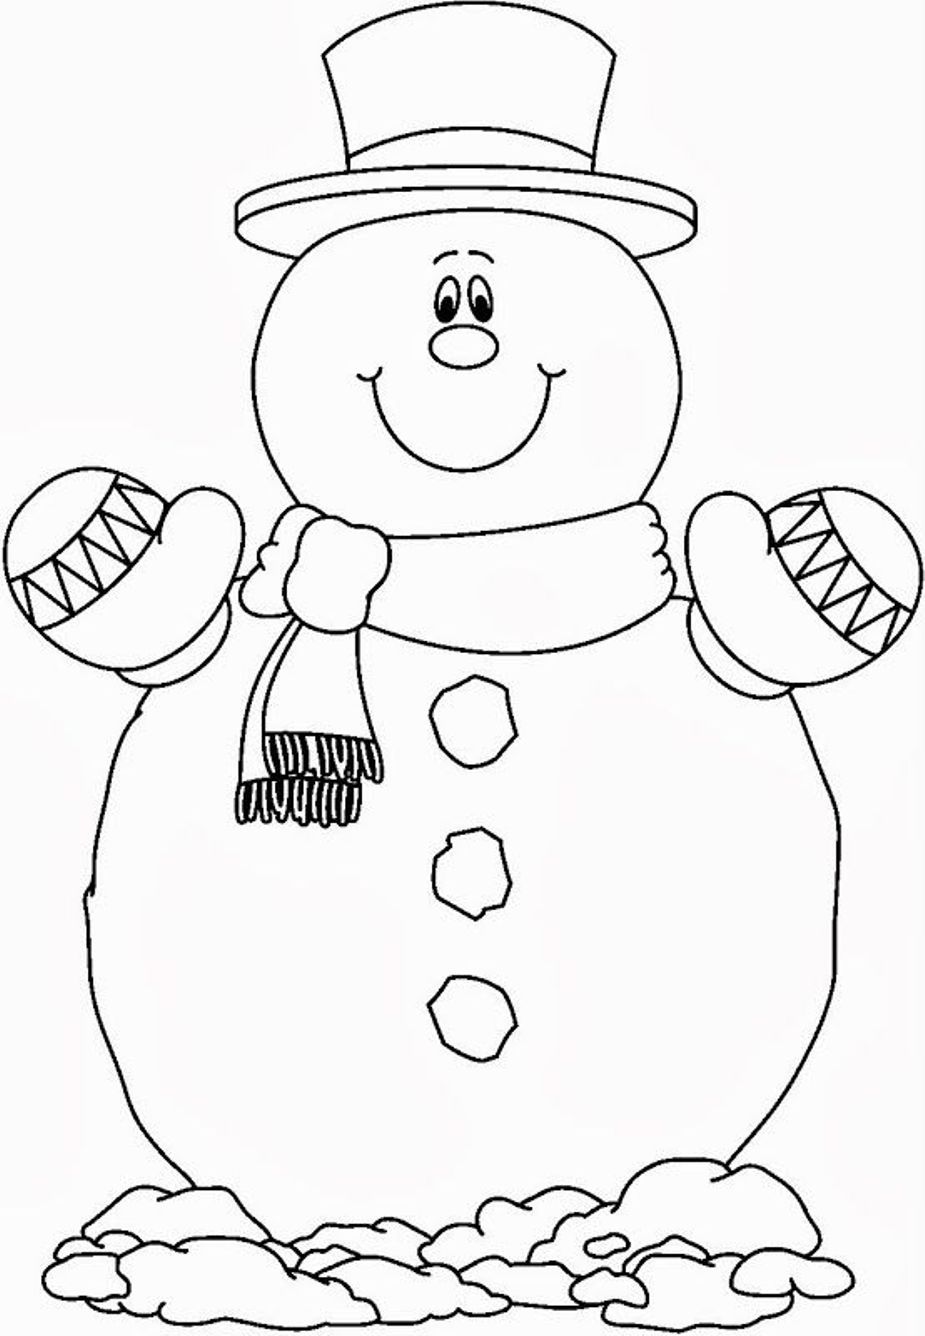 Snowman Coloring Page : Snowman Coloring Pages To Print For ...